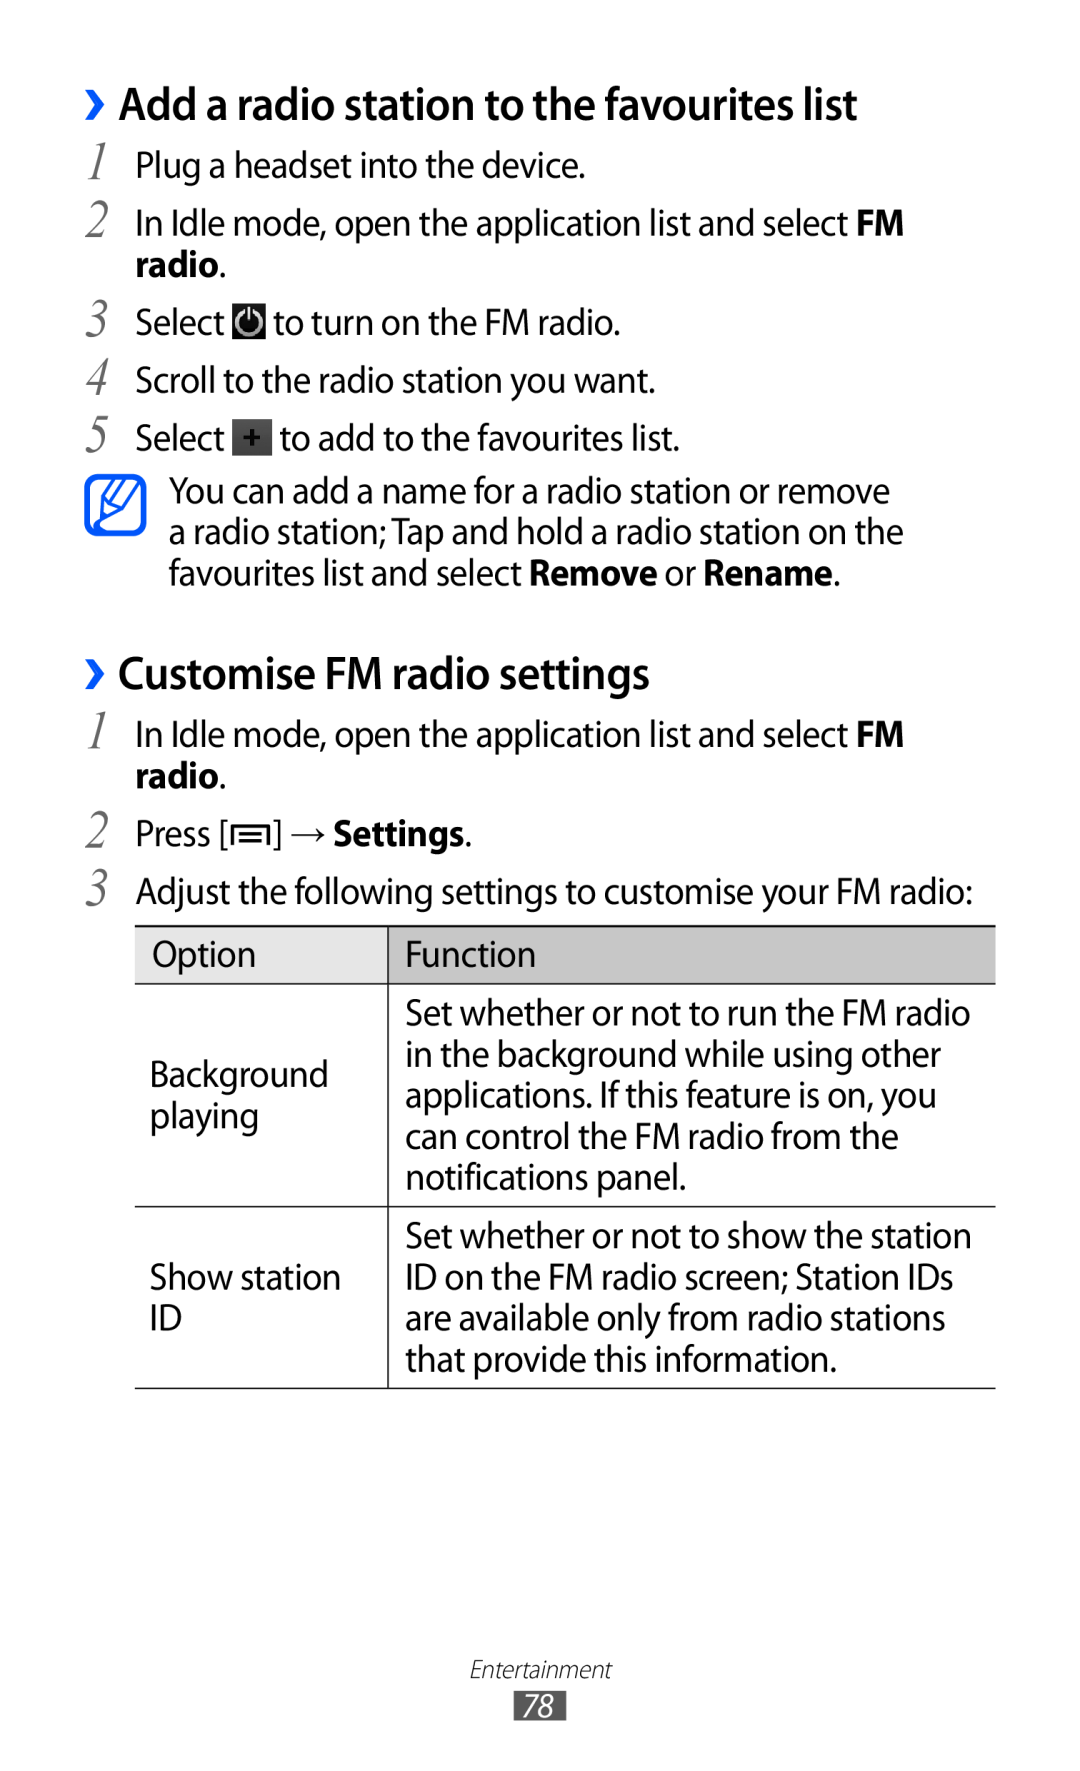 Samsung GT-I9070 user manual ››Add a radio station to the favourites list, ››Customise FM radio settings 